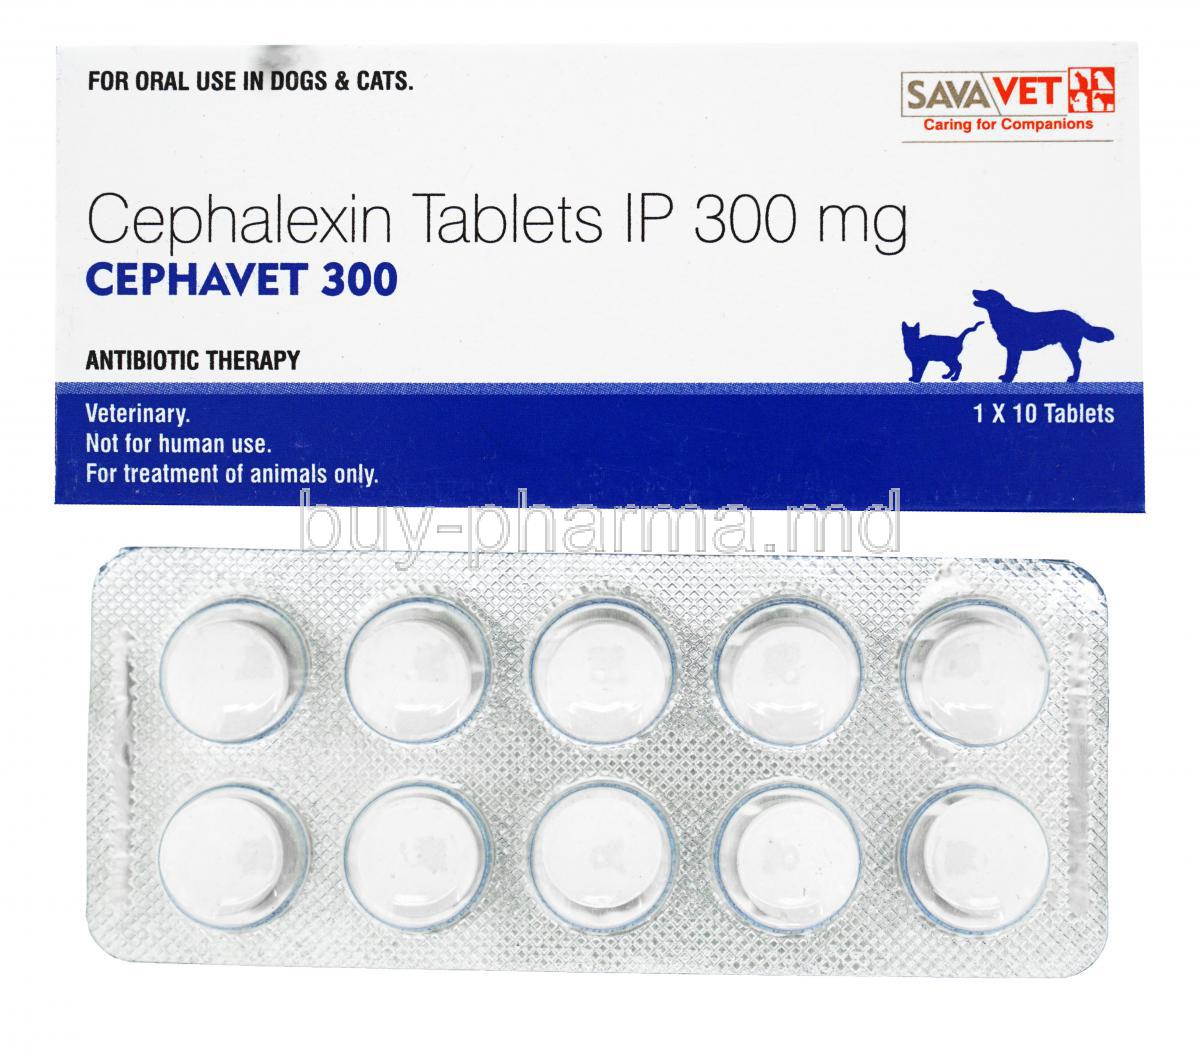 Cephavet, Cephalexin, 300mg, 1x 10 tabs, Antibiotic Therapy, SavaVet, for oral use in dogs and cats, box and blister pack front presentation Cephavet 300